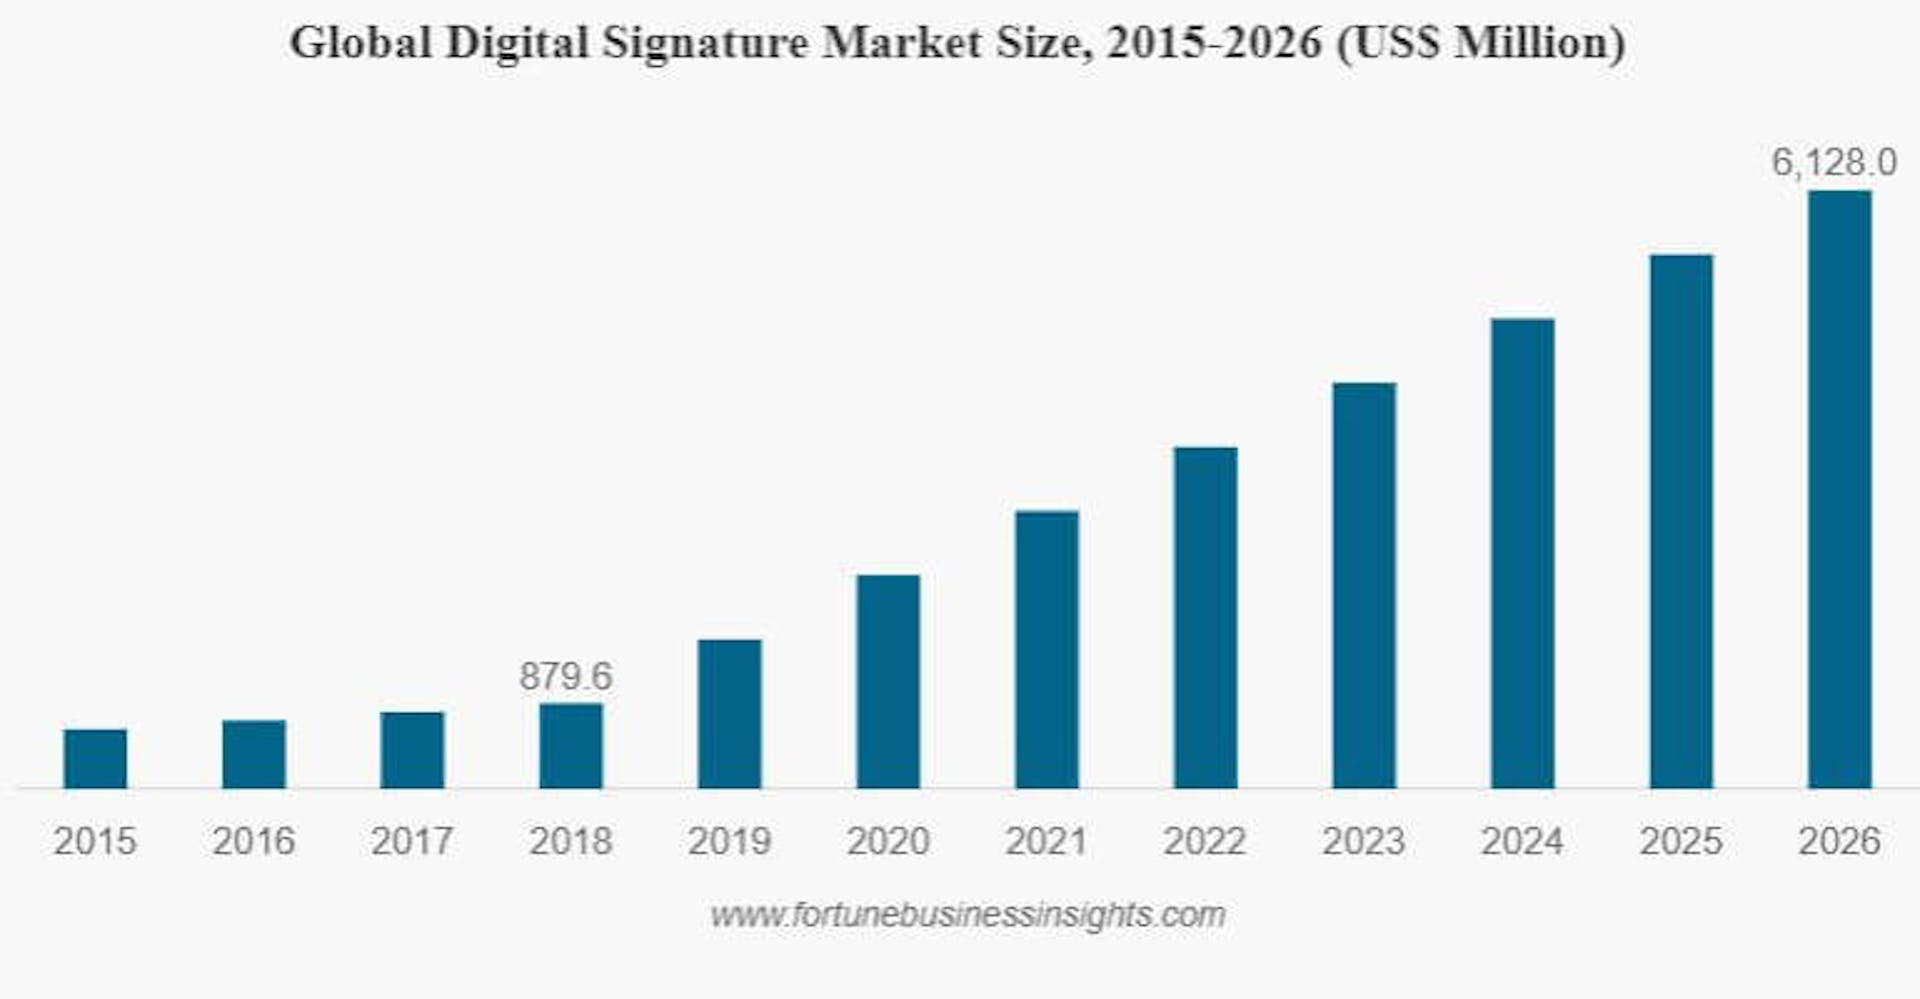 Global digital signature market size grew from 2015-2026 and is expected to reach USD 7.99 billion by 2027